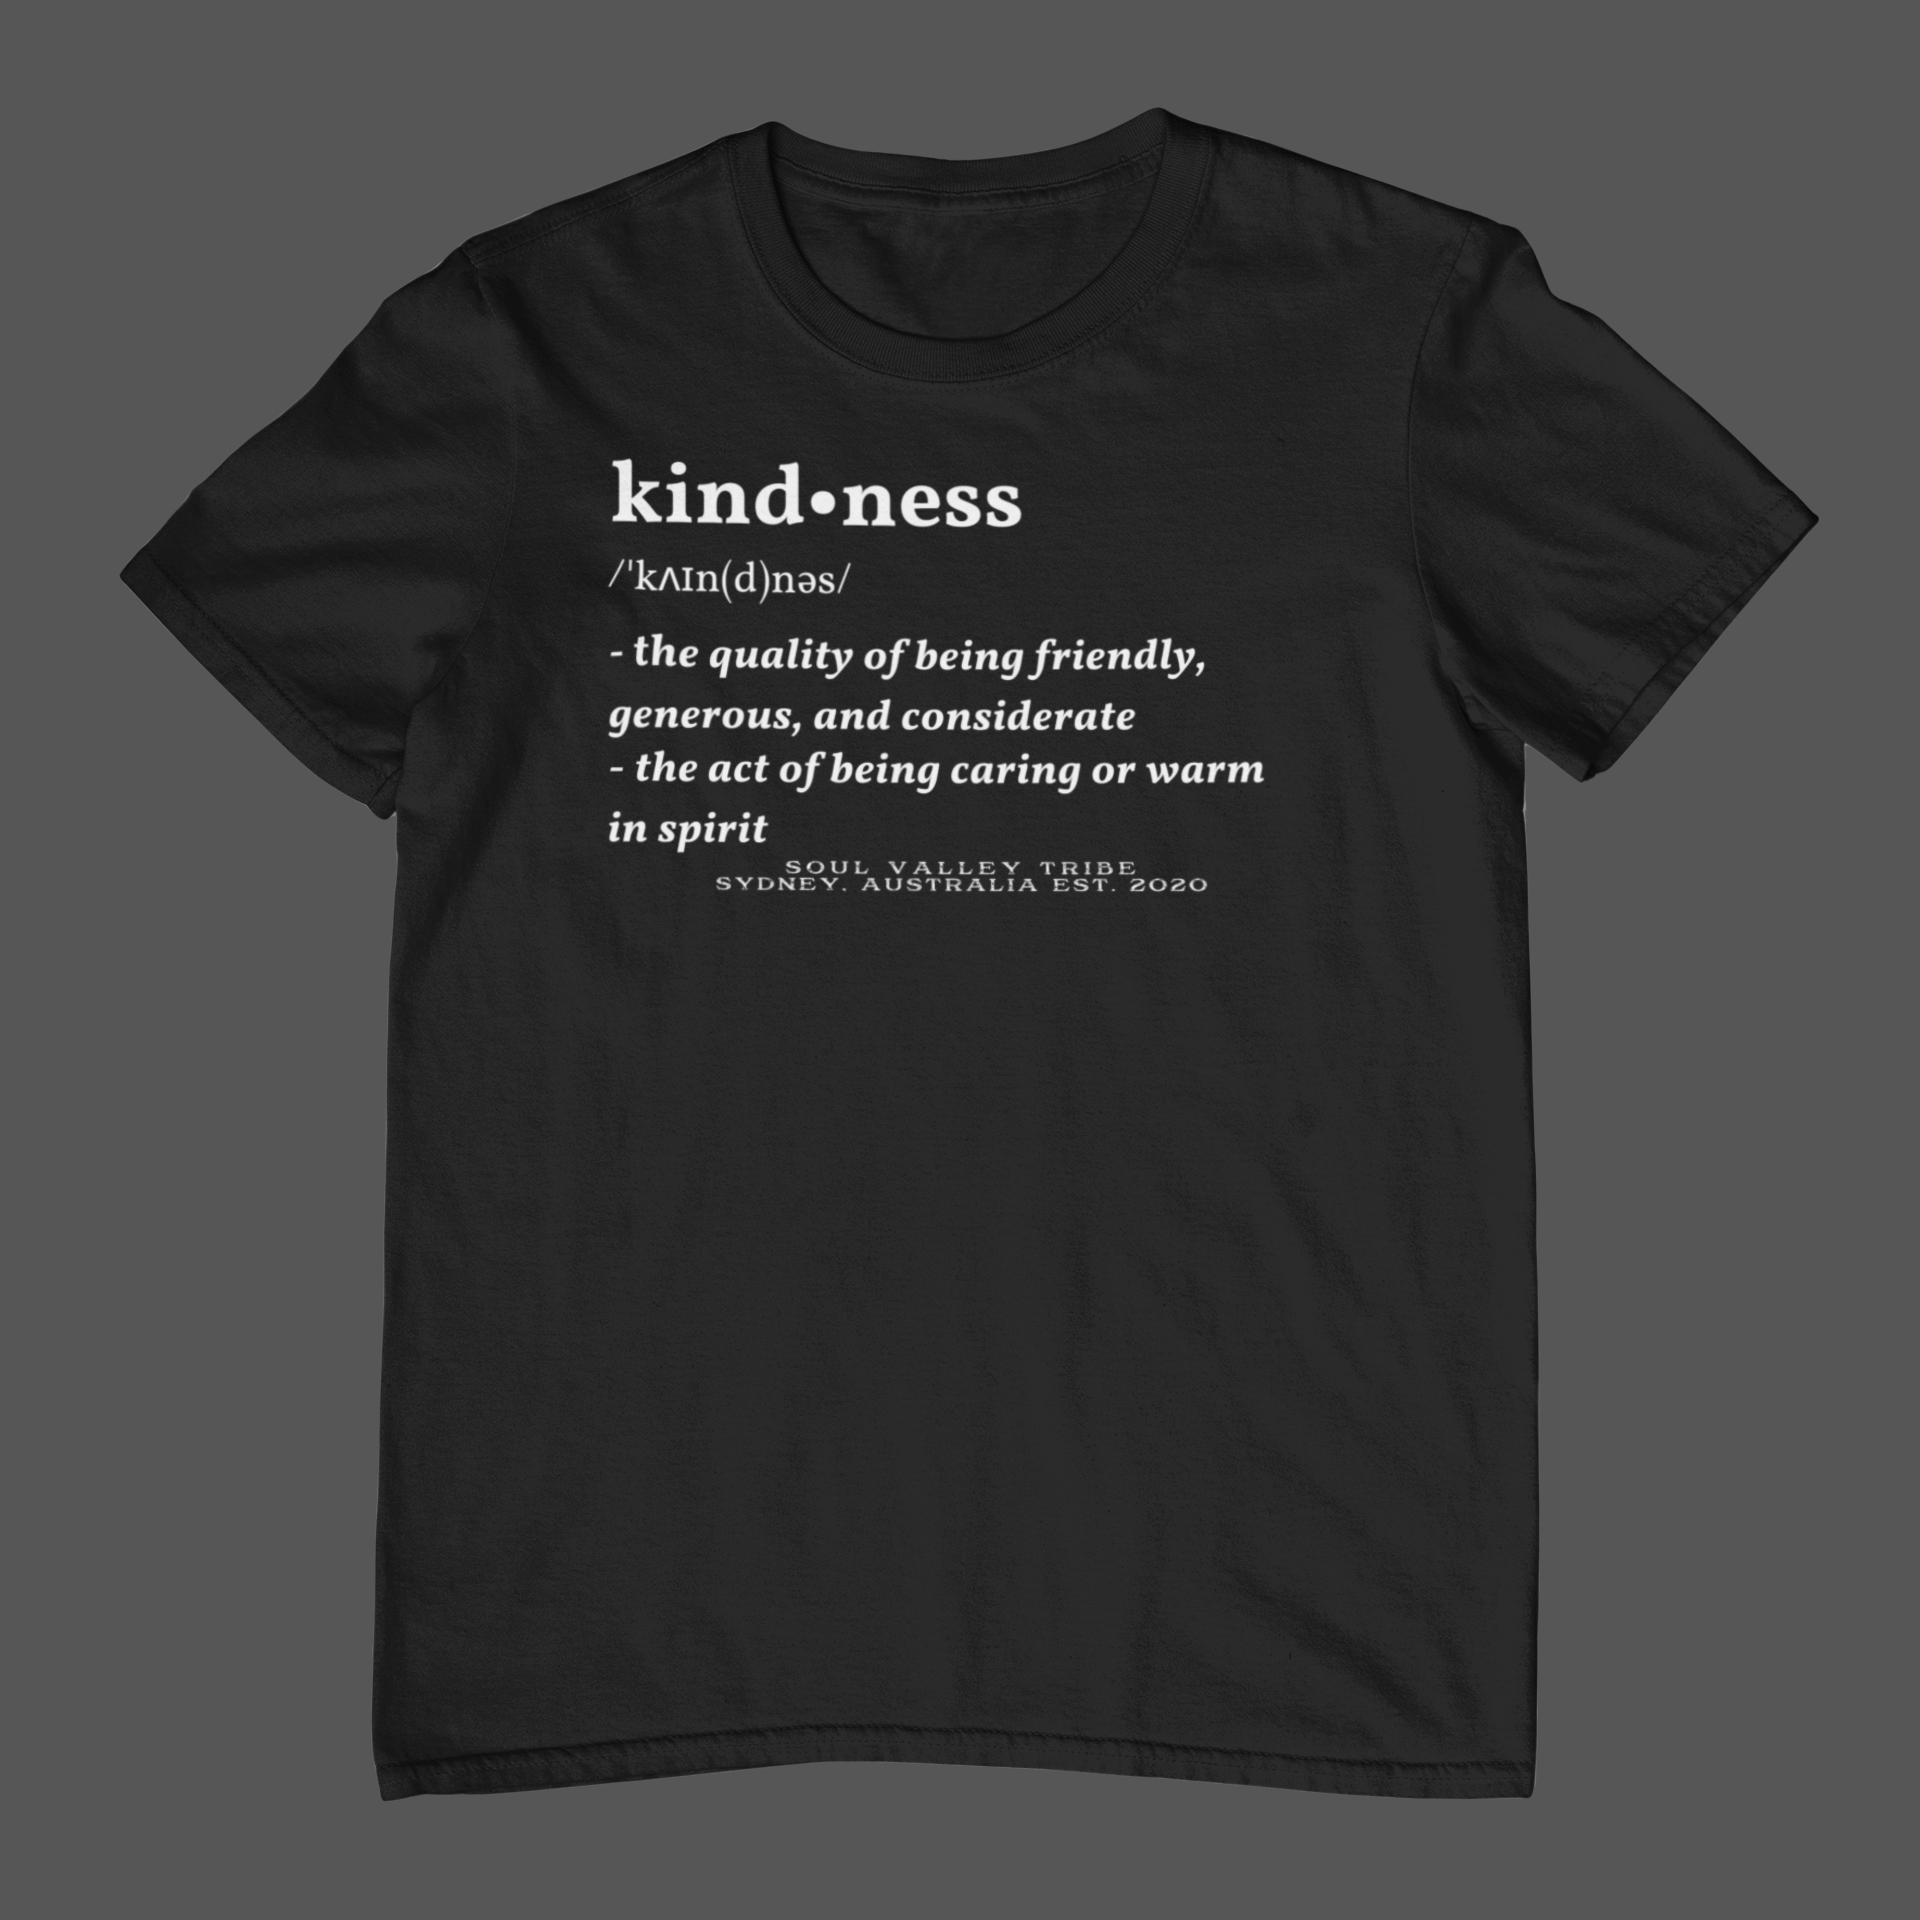 soulvalleytribe Kindness Tee Black / Small Shirts & Tops